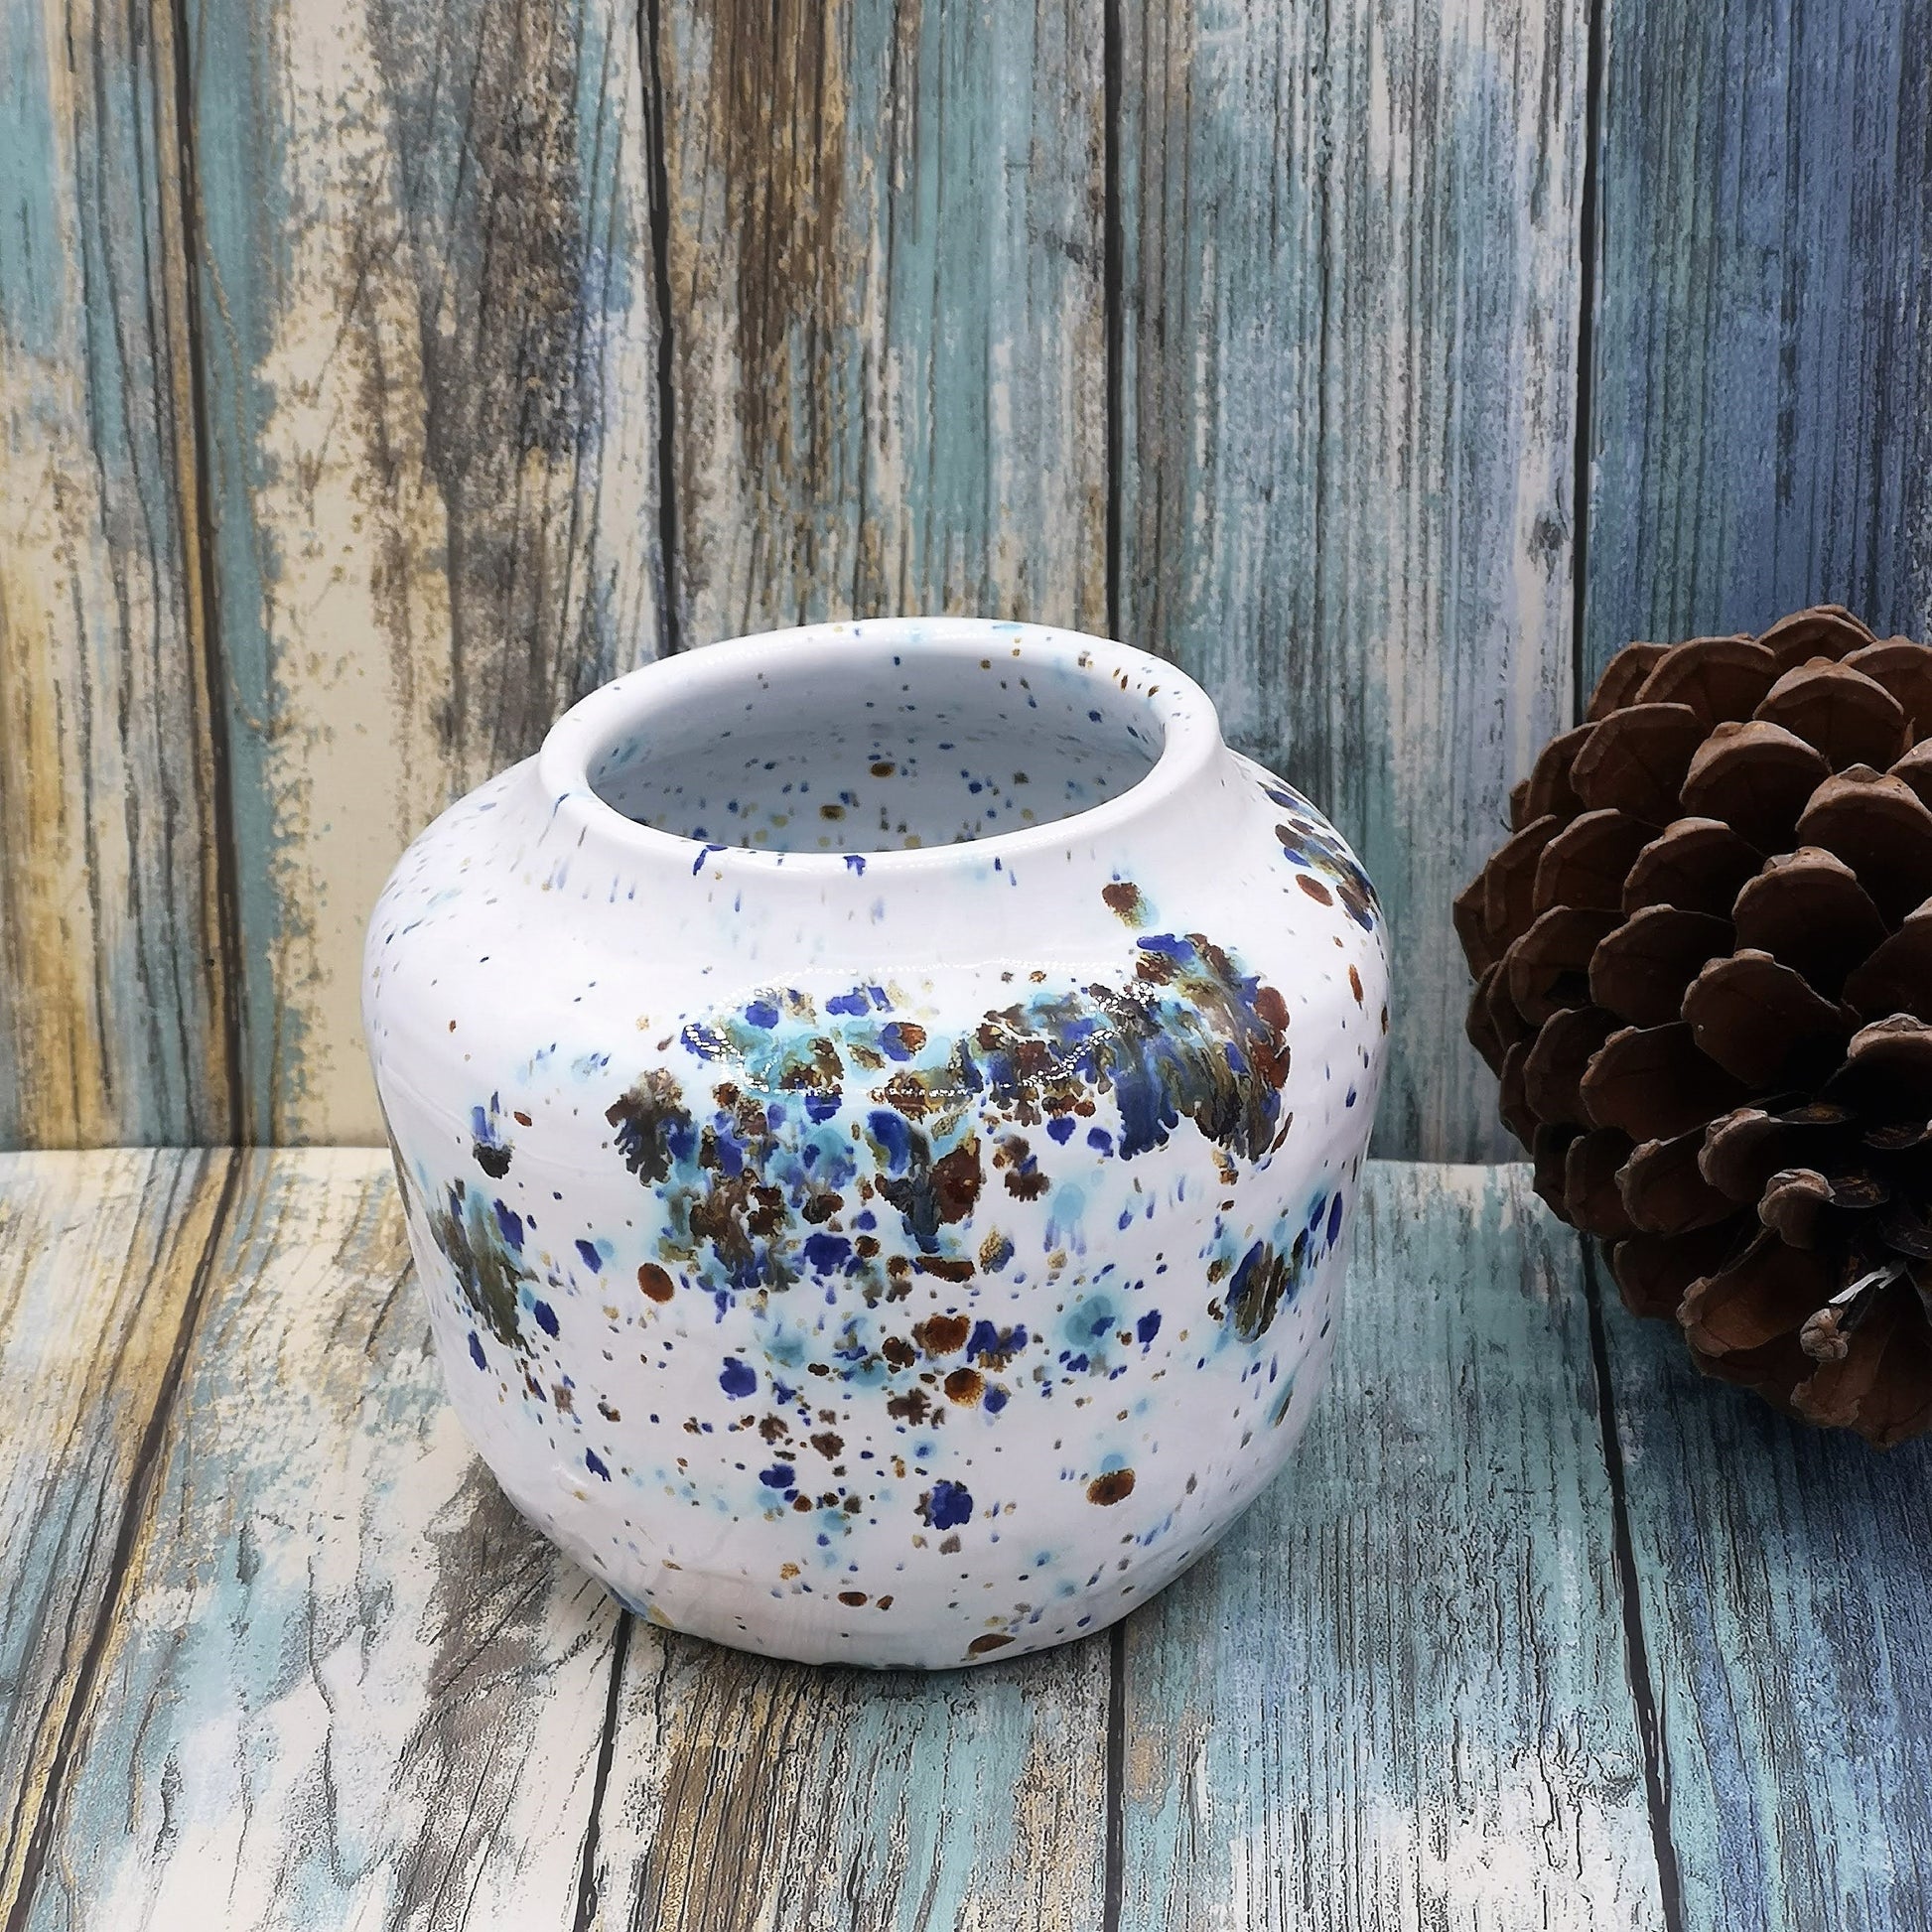 Handmade Ceramic Bud Vase, Speckled Modern Pottery Vase For Flowers, Unique House Warming Gifts For Couple, Custom Wedding Gift - Ceramica Ana Rafael